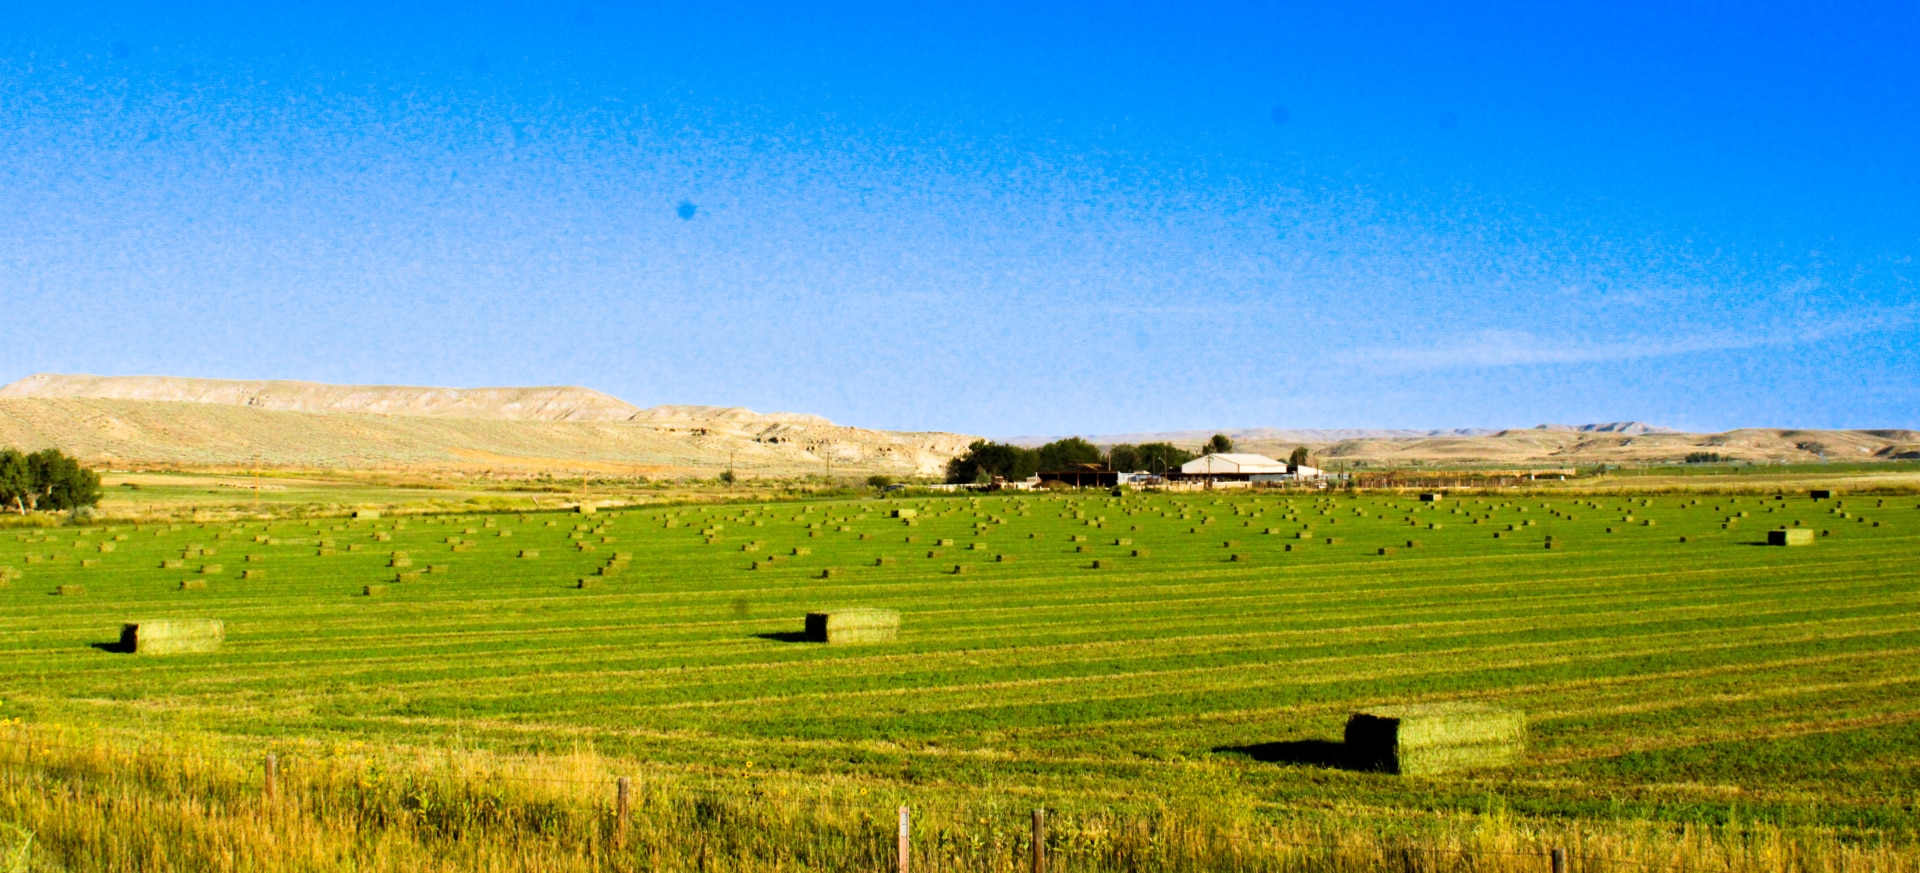 hay ground wyoming butterfield farm and livestock